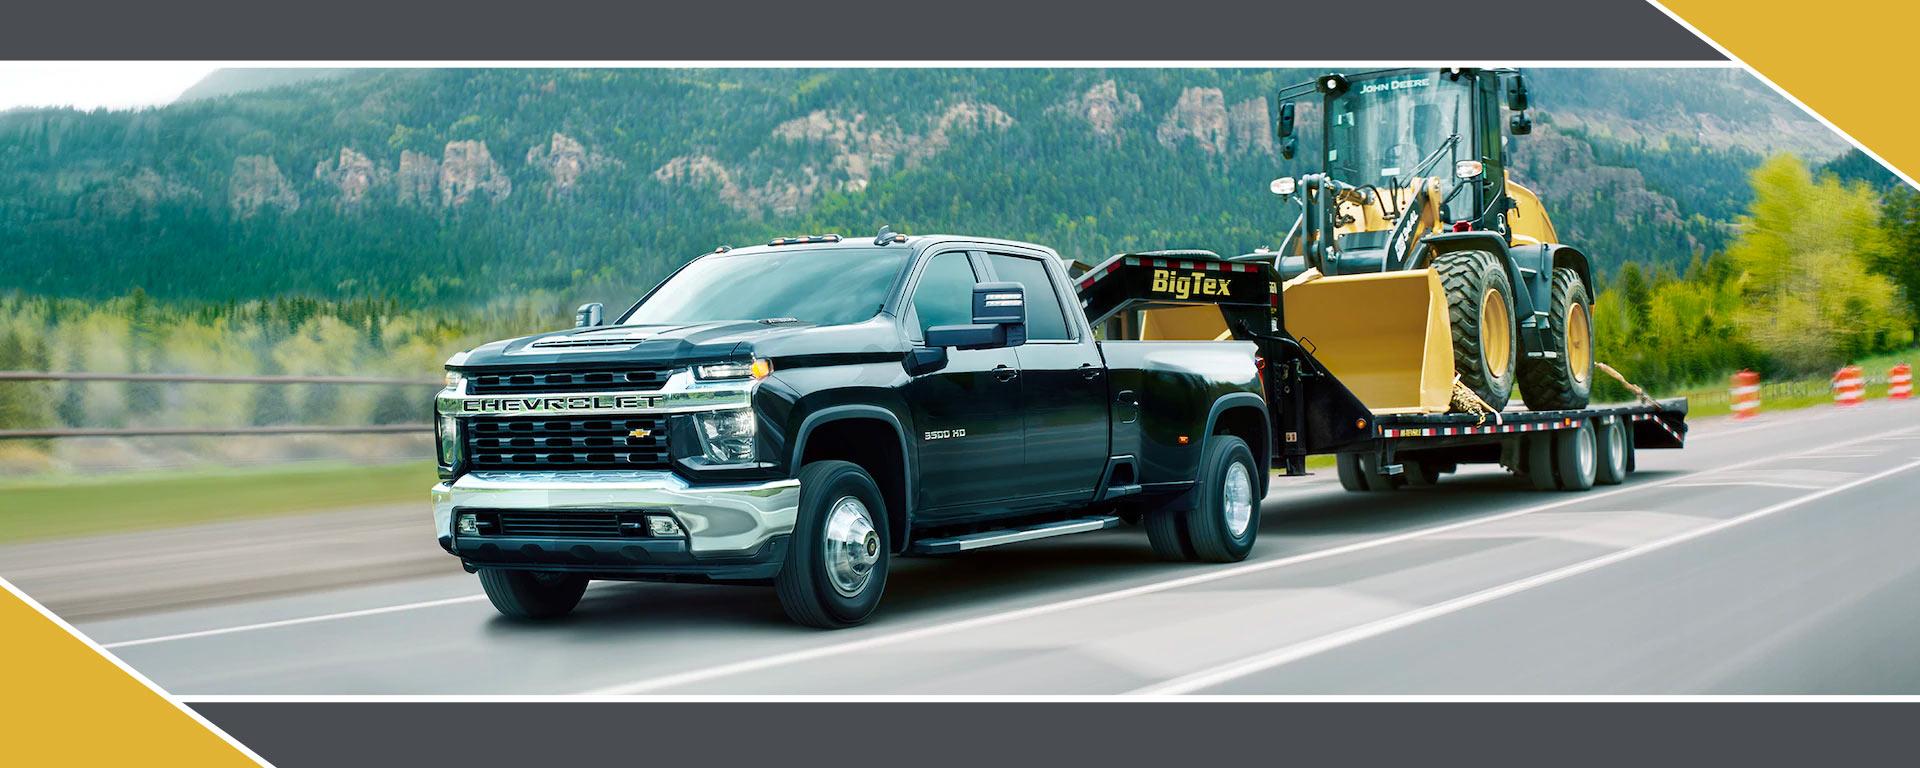 Chevy towing package